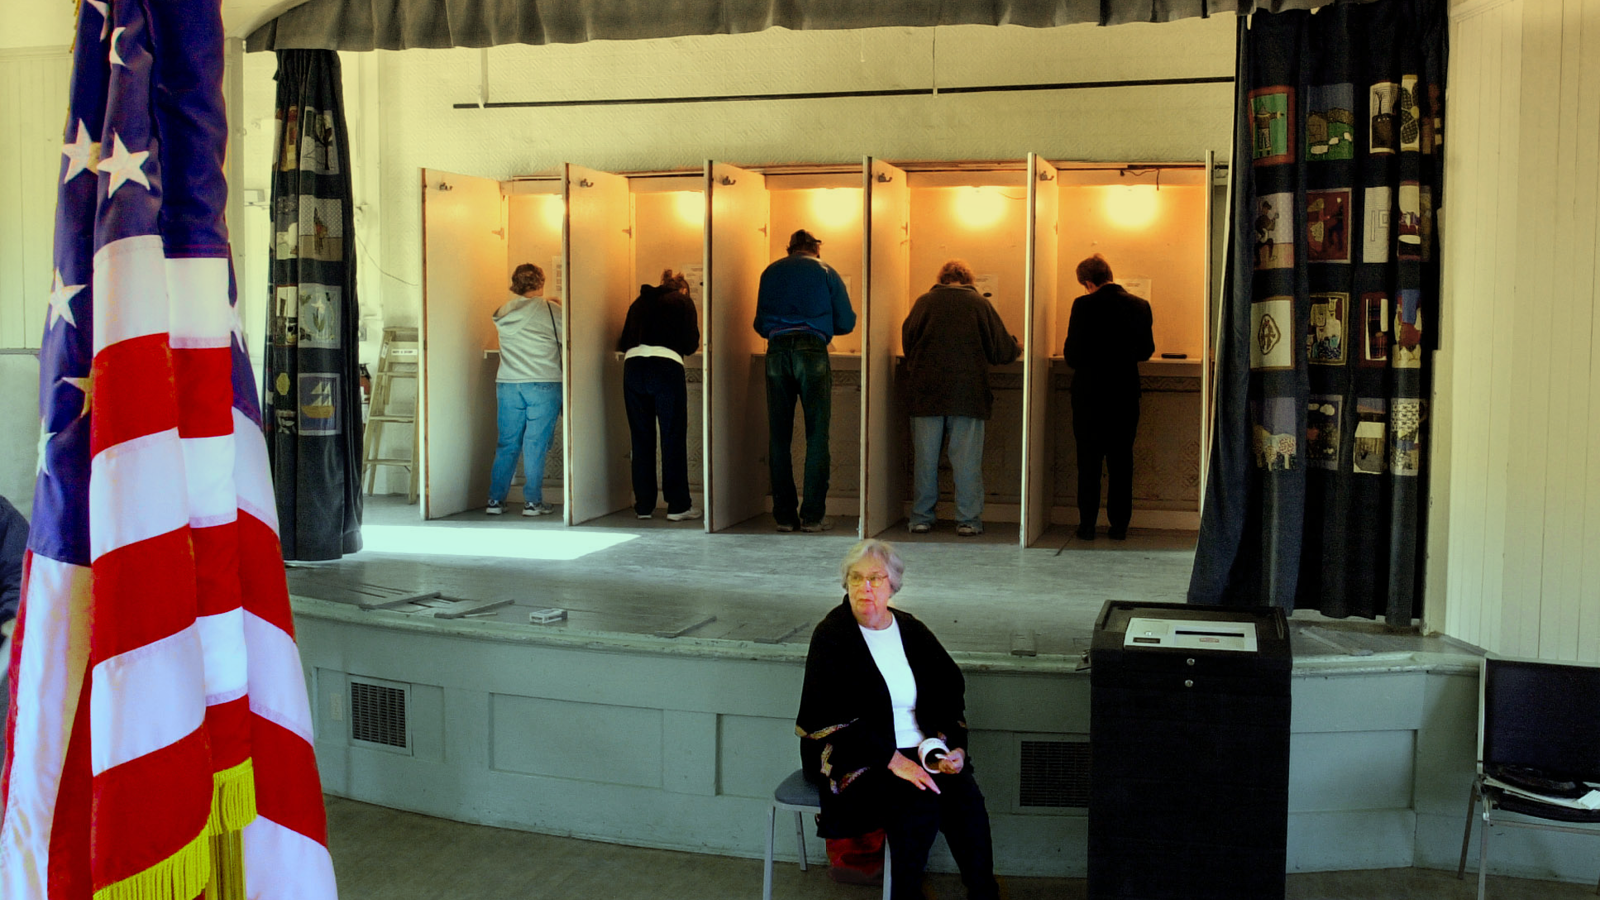 A photo of people in a voting booth in the background, with an American flag and poll worker in the foreground.